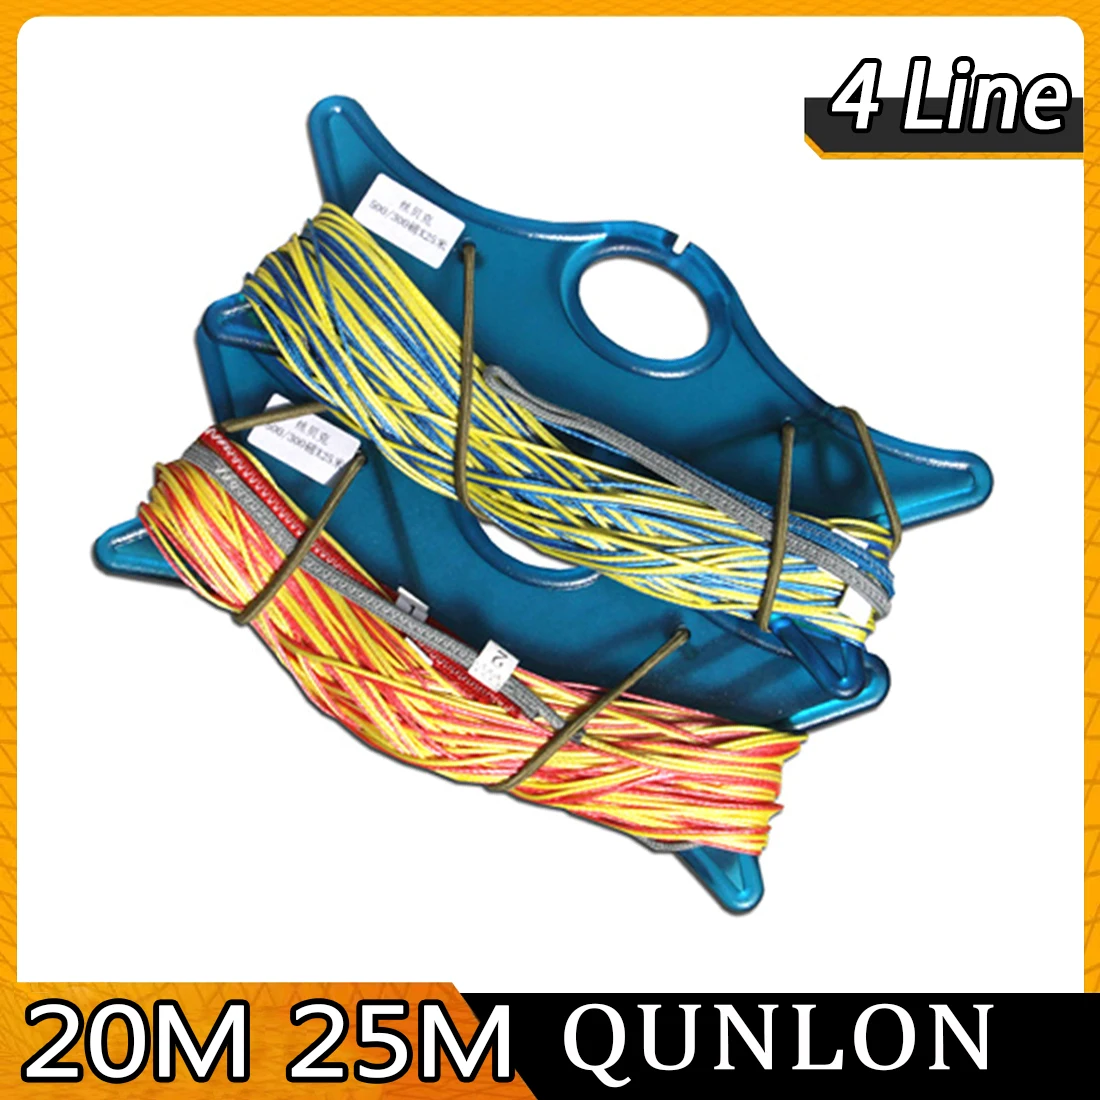 25m*4 High Qualit Kite Line Dyneema Material Outdoor Toys Flying Kite Accessorie 